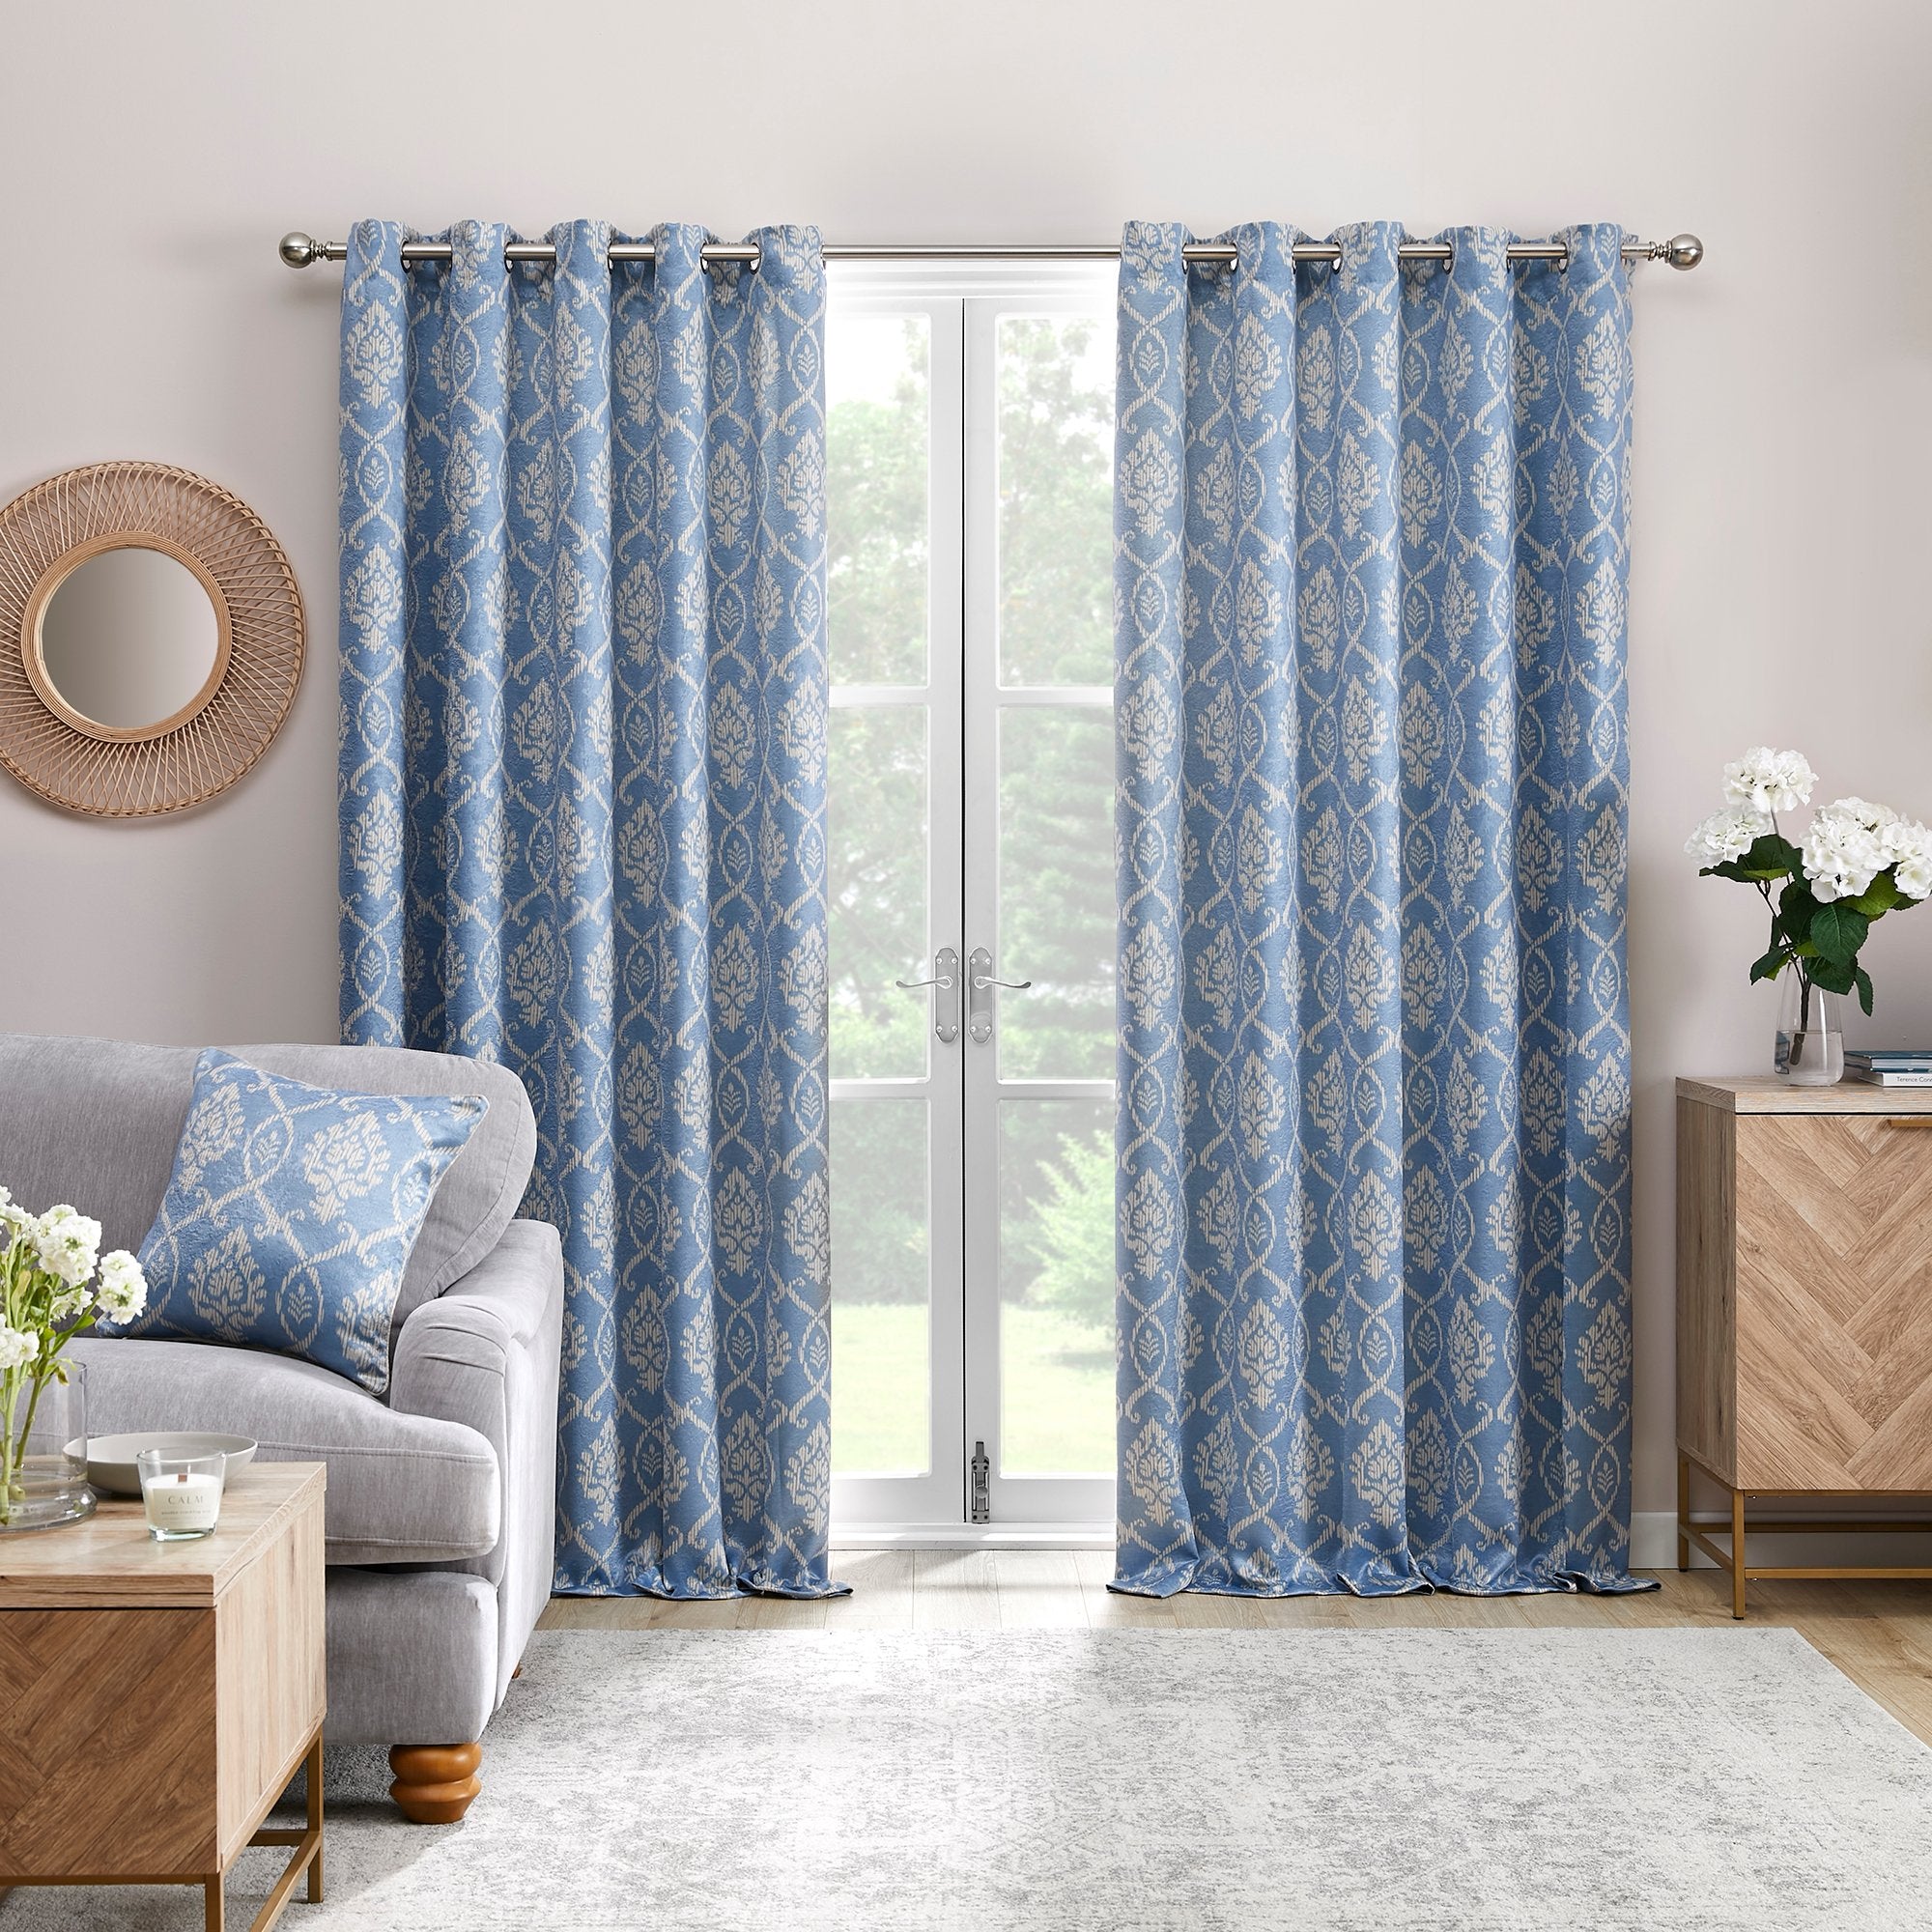 Pair of Eyelet Curtains Vivianna by Dreams & Drapes Curtains in Blue